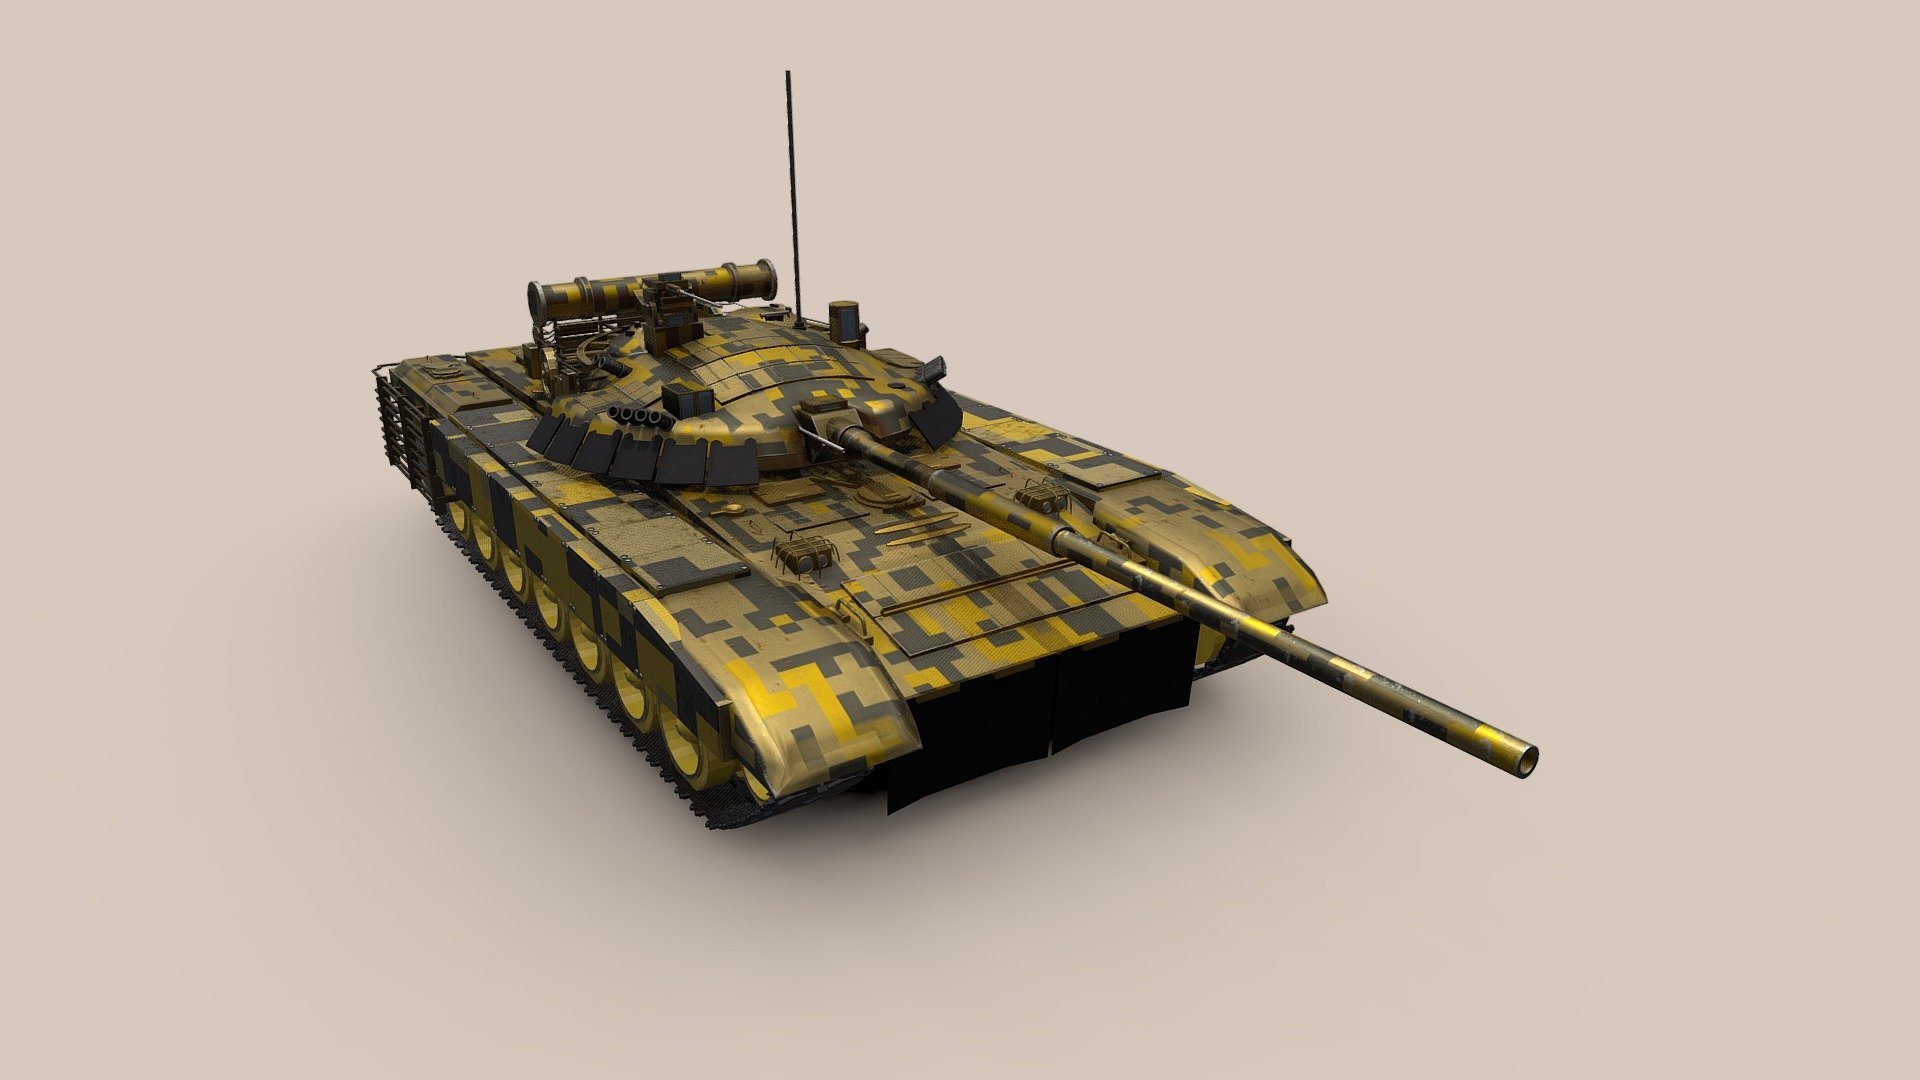 A combination of various tank models, including the T-80, T-84, T-64, T-72, T-80U, T-80UK and the Challenger. Armed with a 135mm gun a 15mm heavy machine gun and a 20mm autocannon, the HammerHead is a vicious tank capable of engaging multiple types of enemies at once, also protected with many types or ERA panels to help its survivabilty against airborne attacks and over-head missile strikes. Top speed of 82km/h on road. Weighs 56 tonnes.

I will upload another version of this with animations and probably with a basic one tone paint scheme, the animations i will do will be, moving, turret turning and firing. Although the first two will most likely be done.

~Hope you enjoy!~

&lsquo;w'/ - D-30-A ' Hammer Head' MBT - 3D model by Barneh_Modelling 3d model